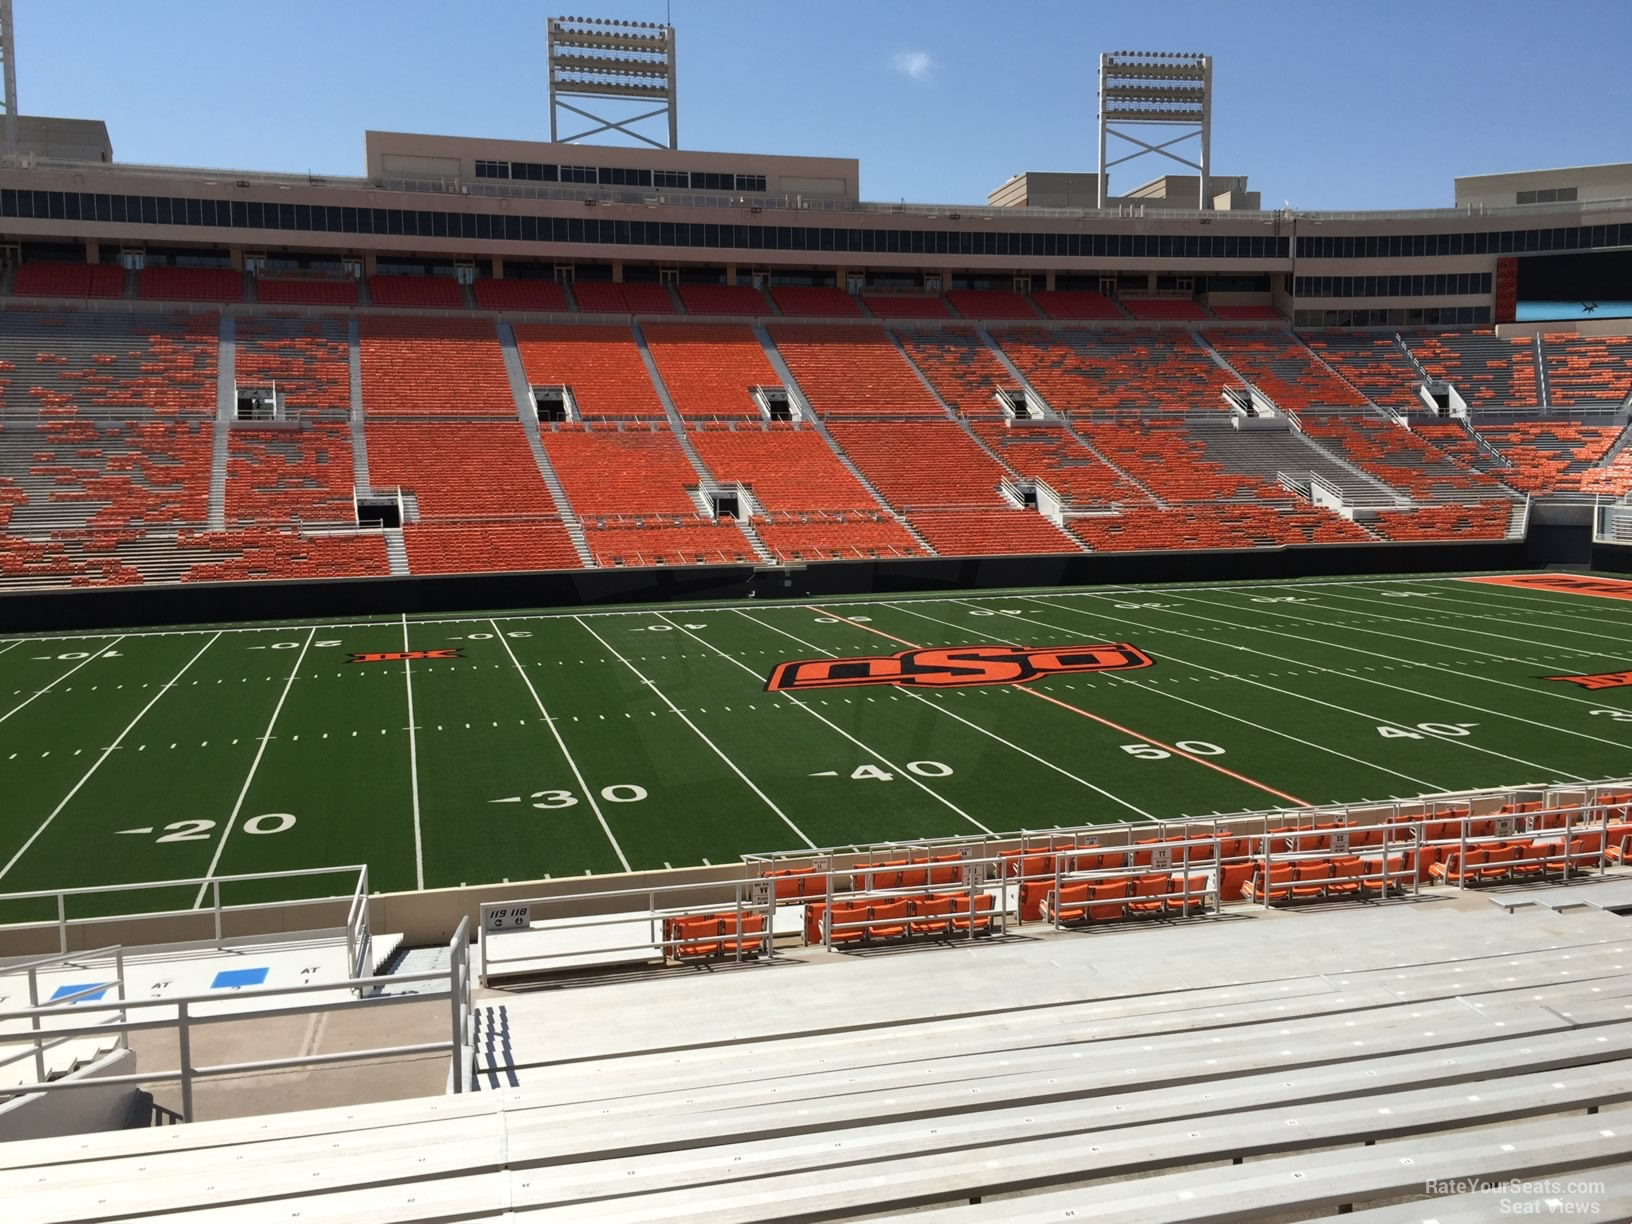 section 226a, row 20 seat view  - boone pickens stadium